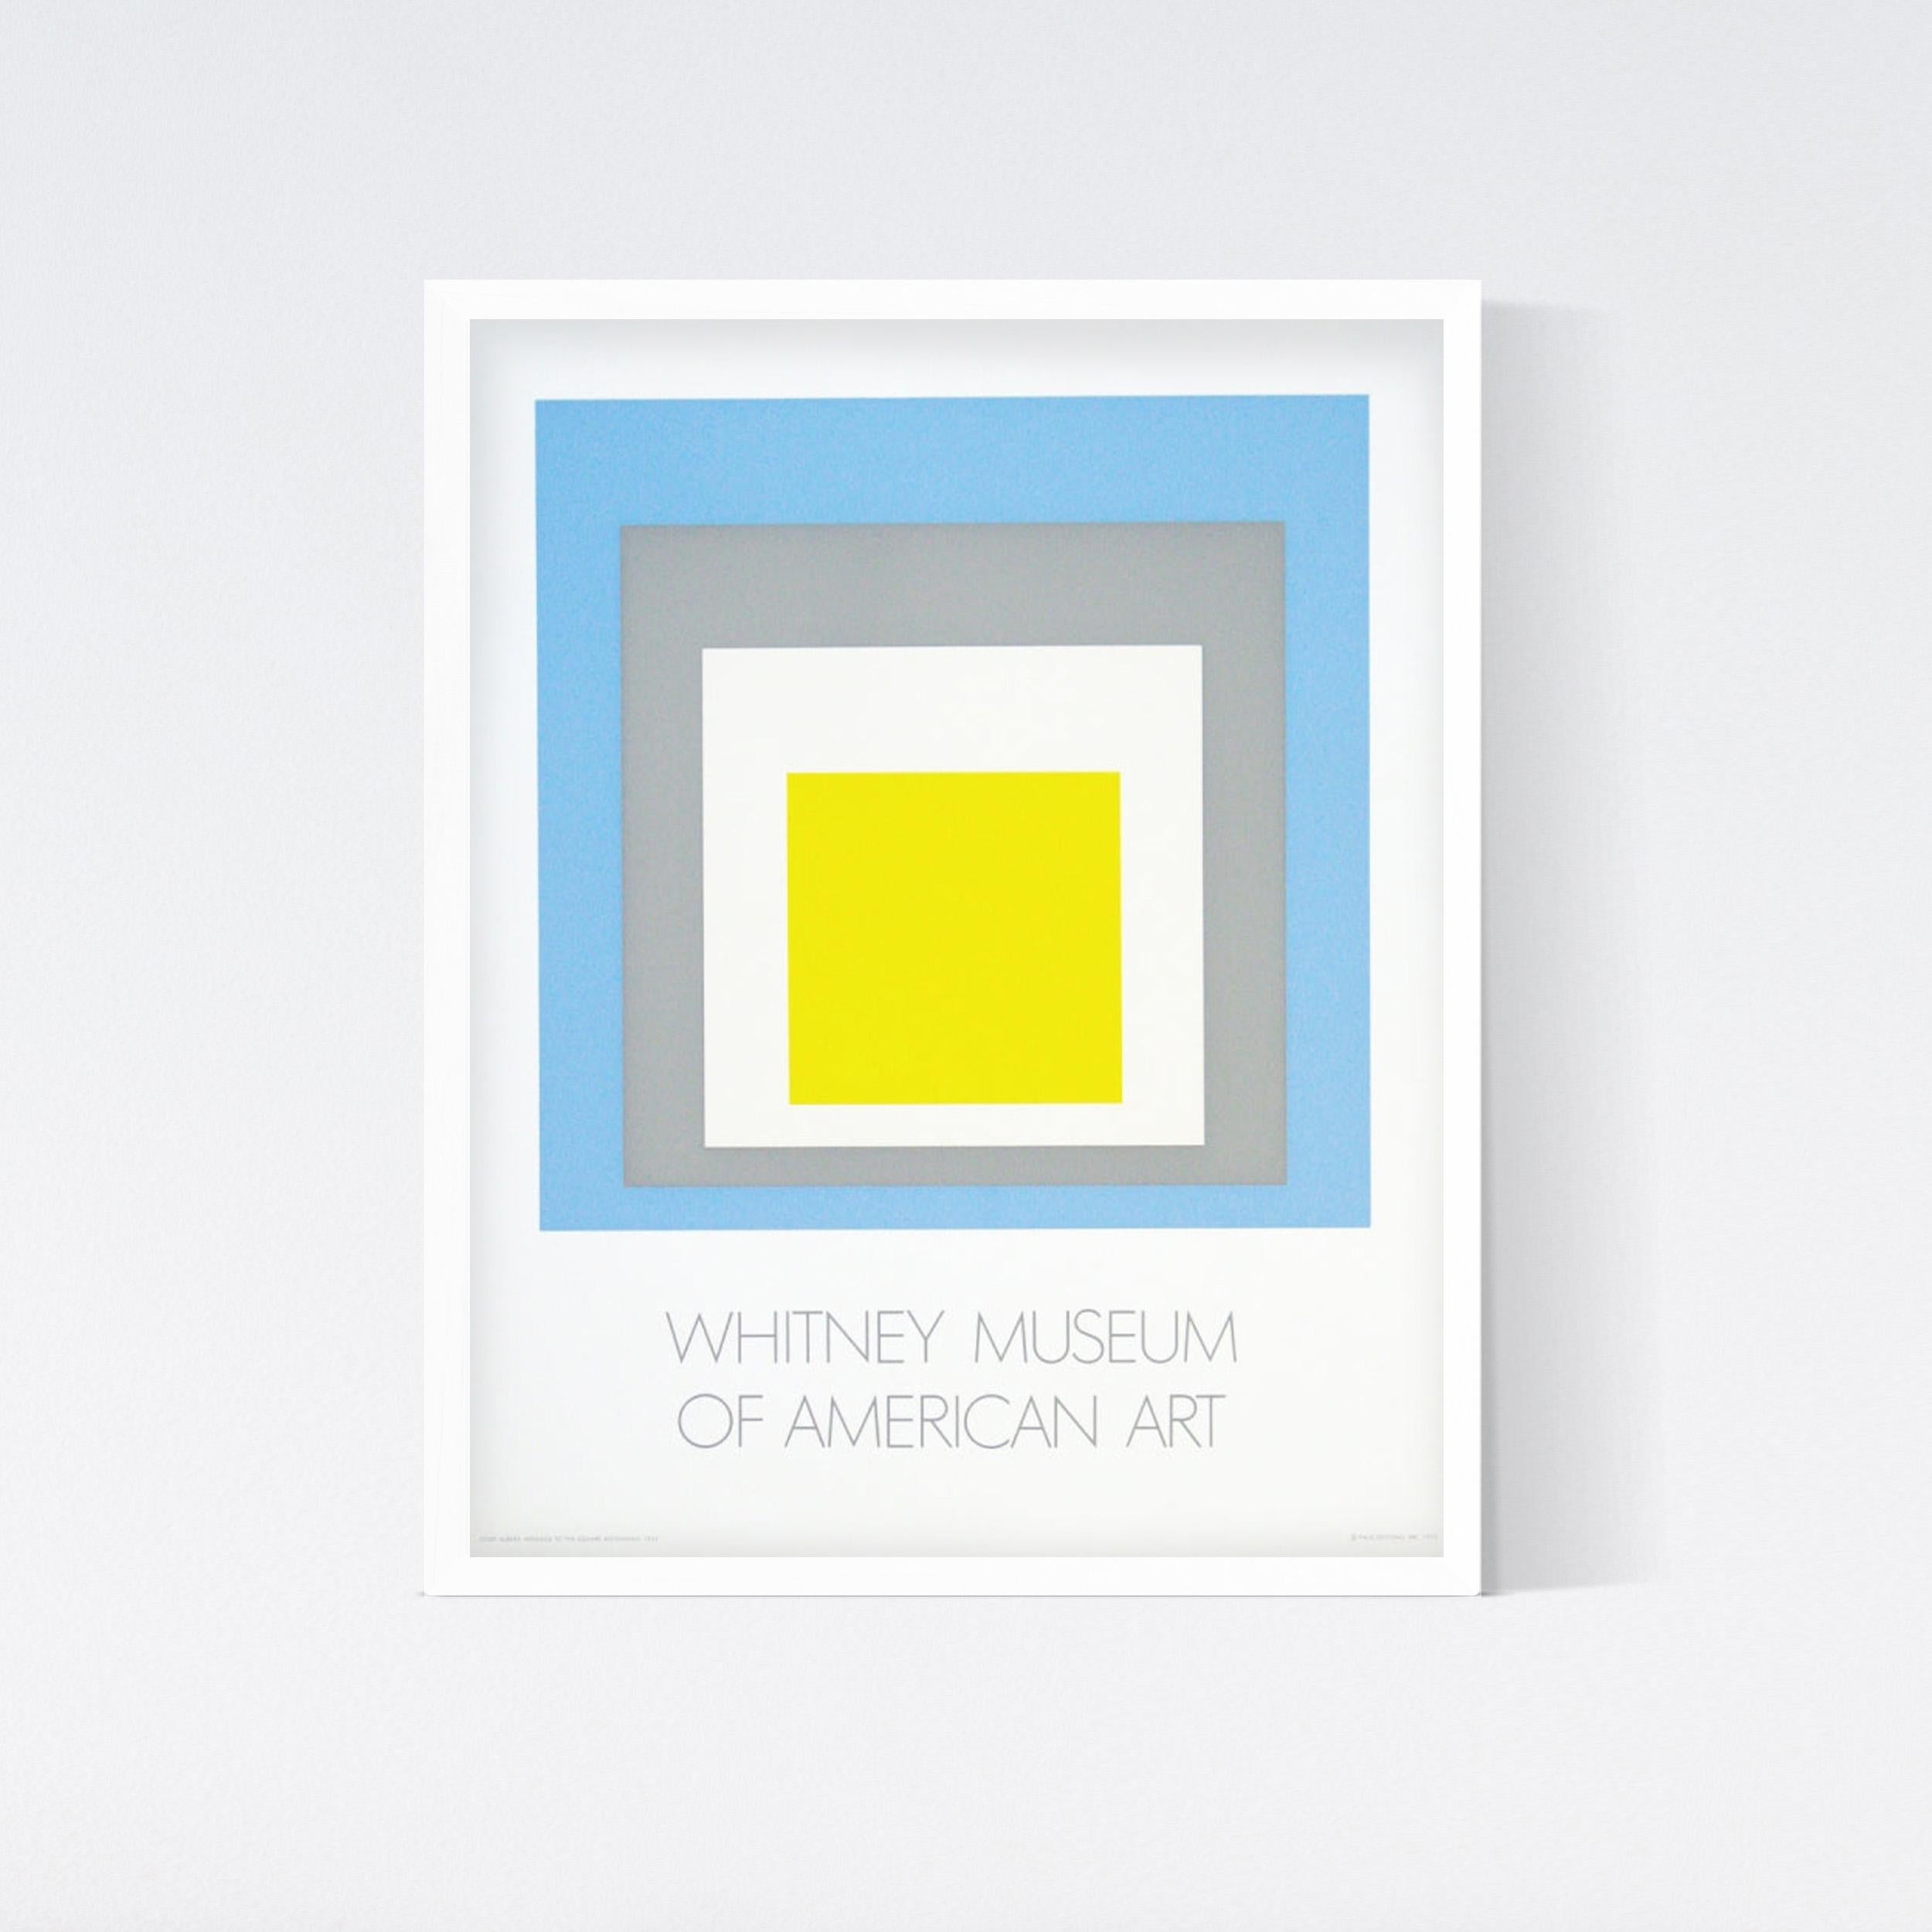 (after) Josef Albers Abstract Print - Josef Albers, 1972 Pace Editions Poster, Homage To The Square: Whitney Museum